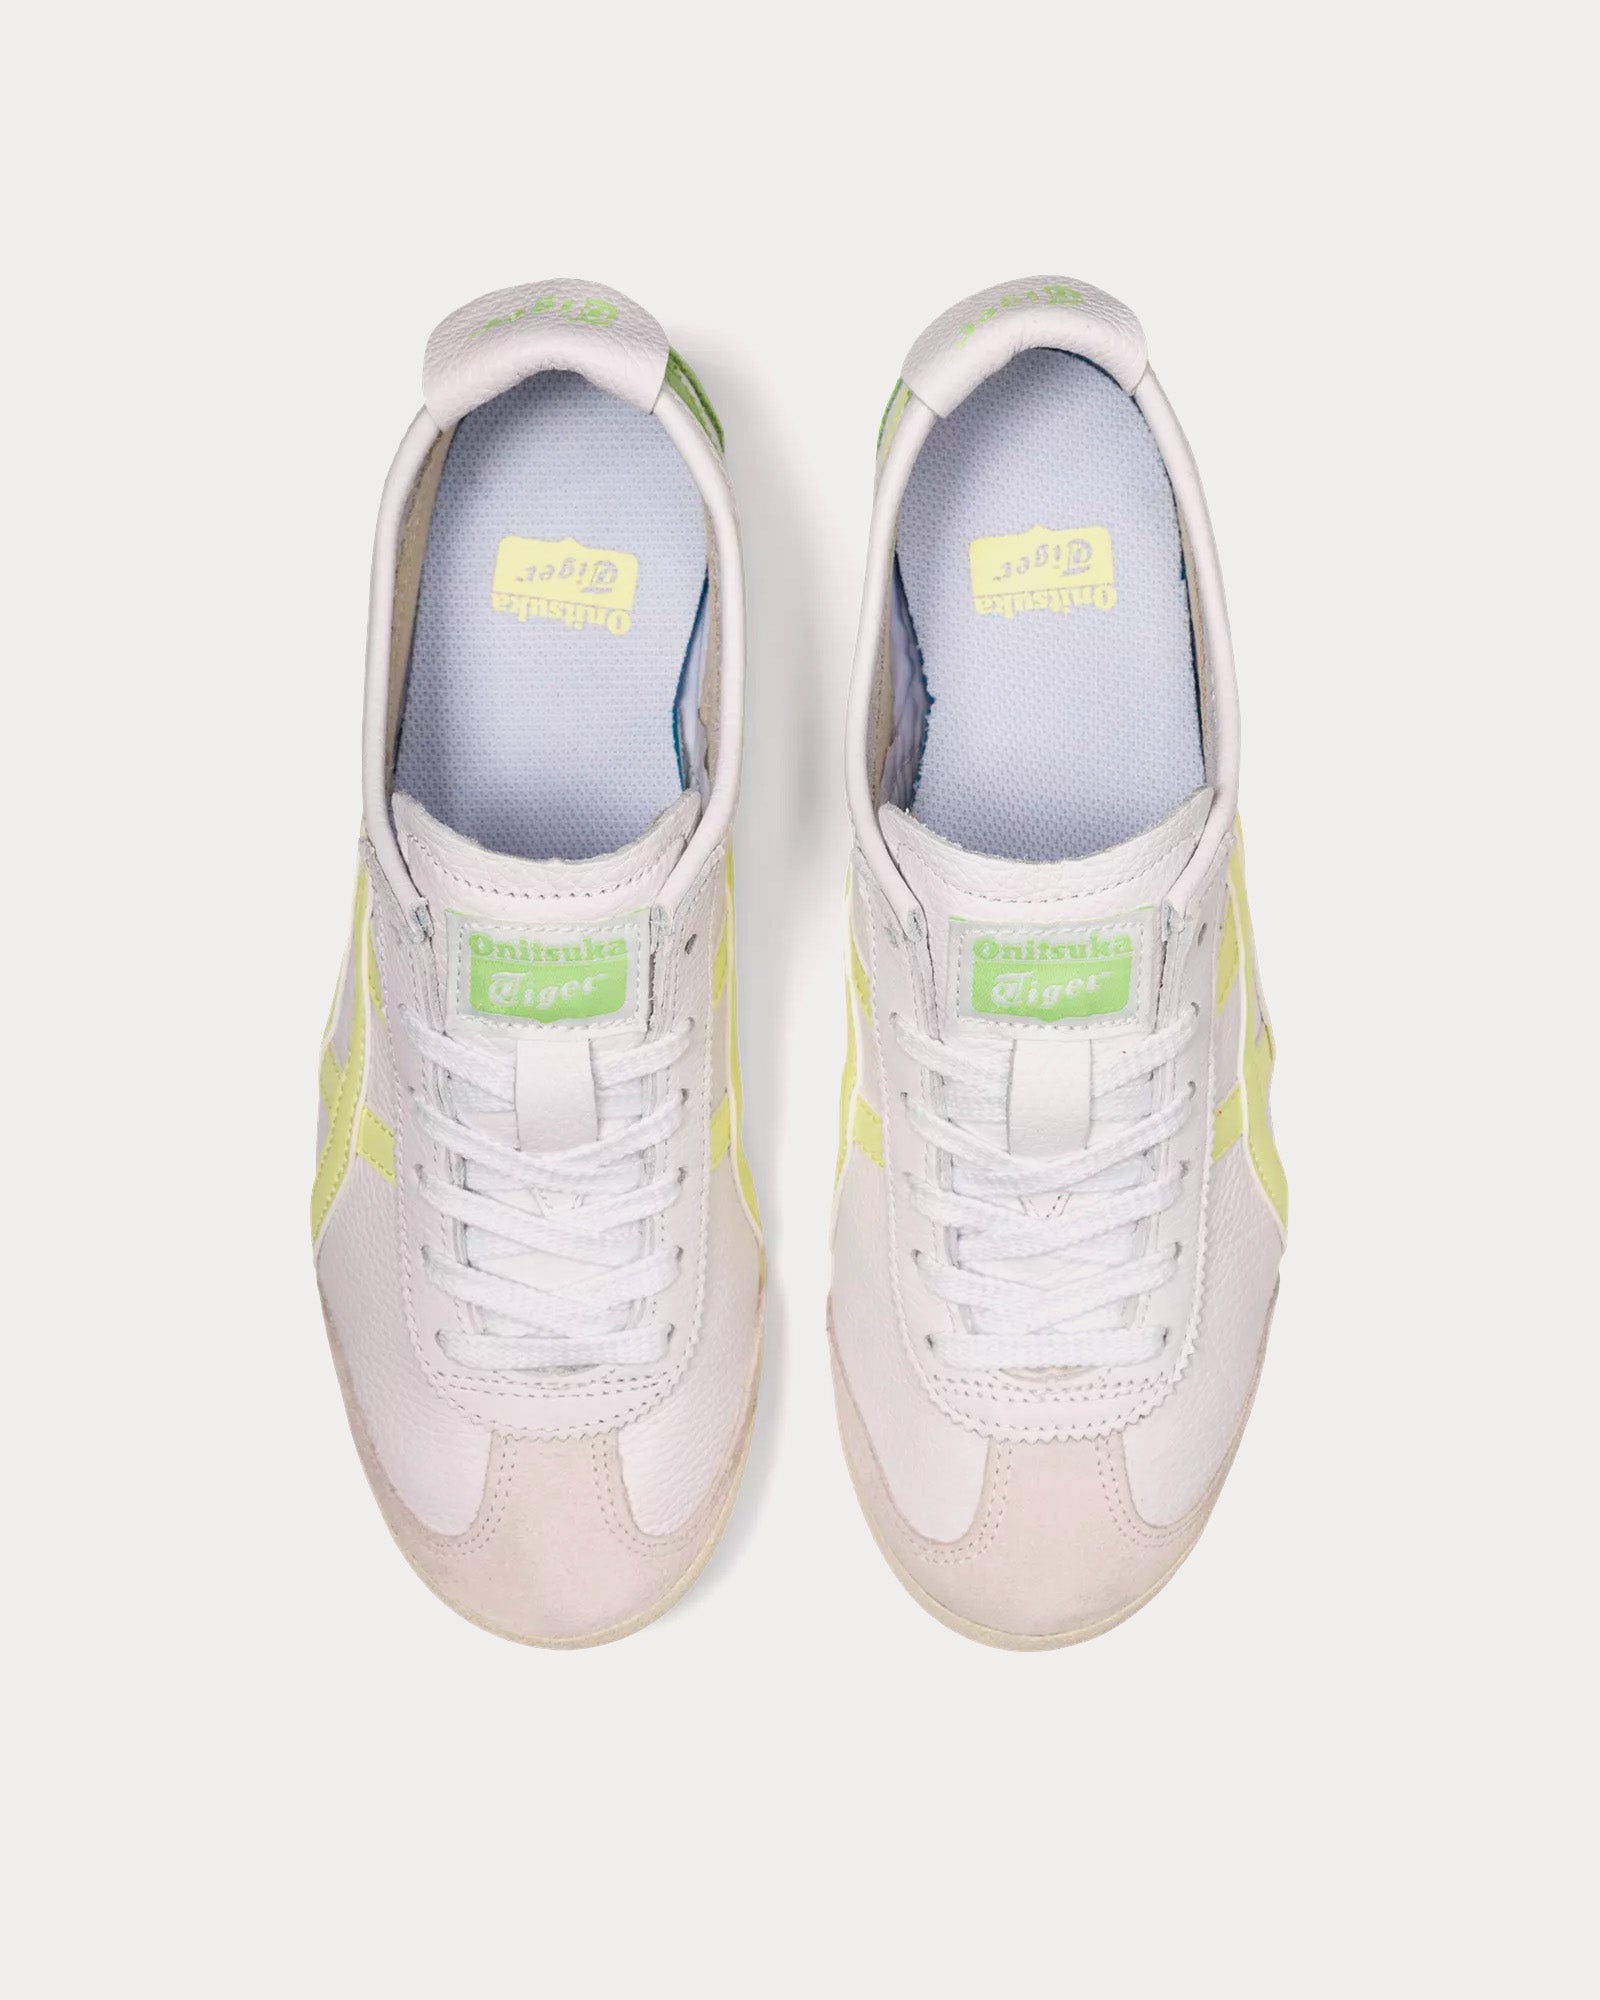 Onitsuka Tiger - Mexico 66 White / Huddle Yellow Low Top Sneakers